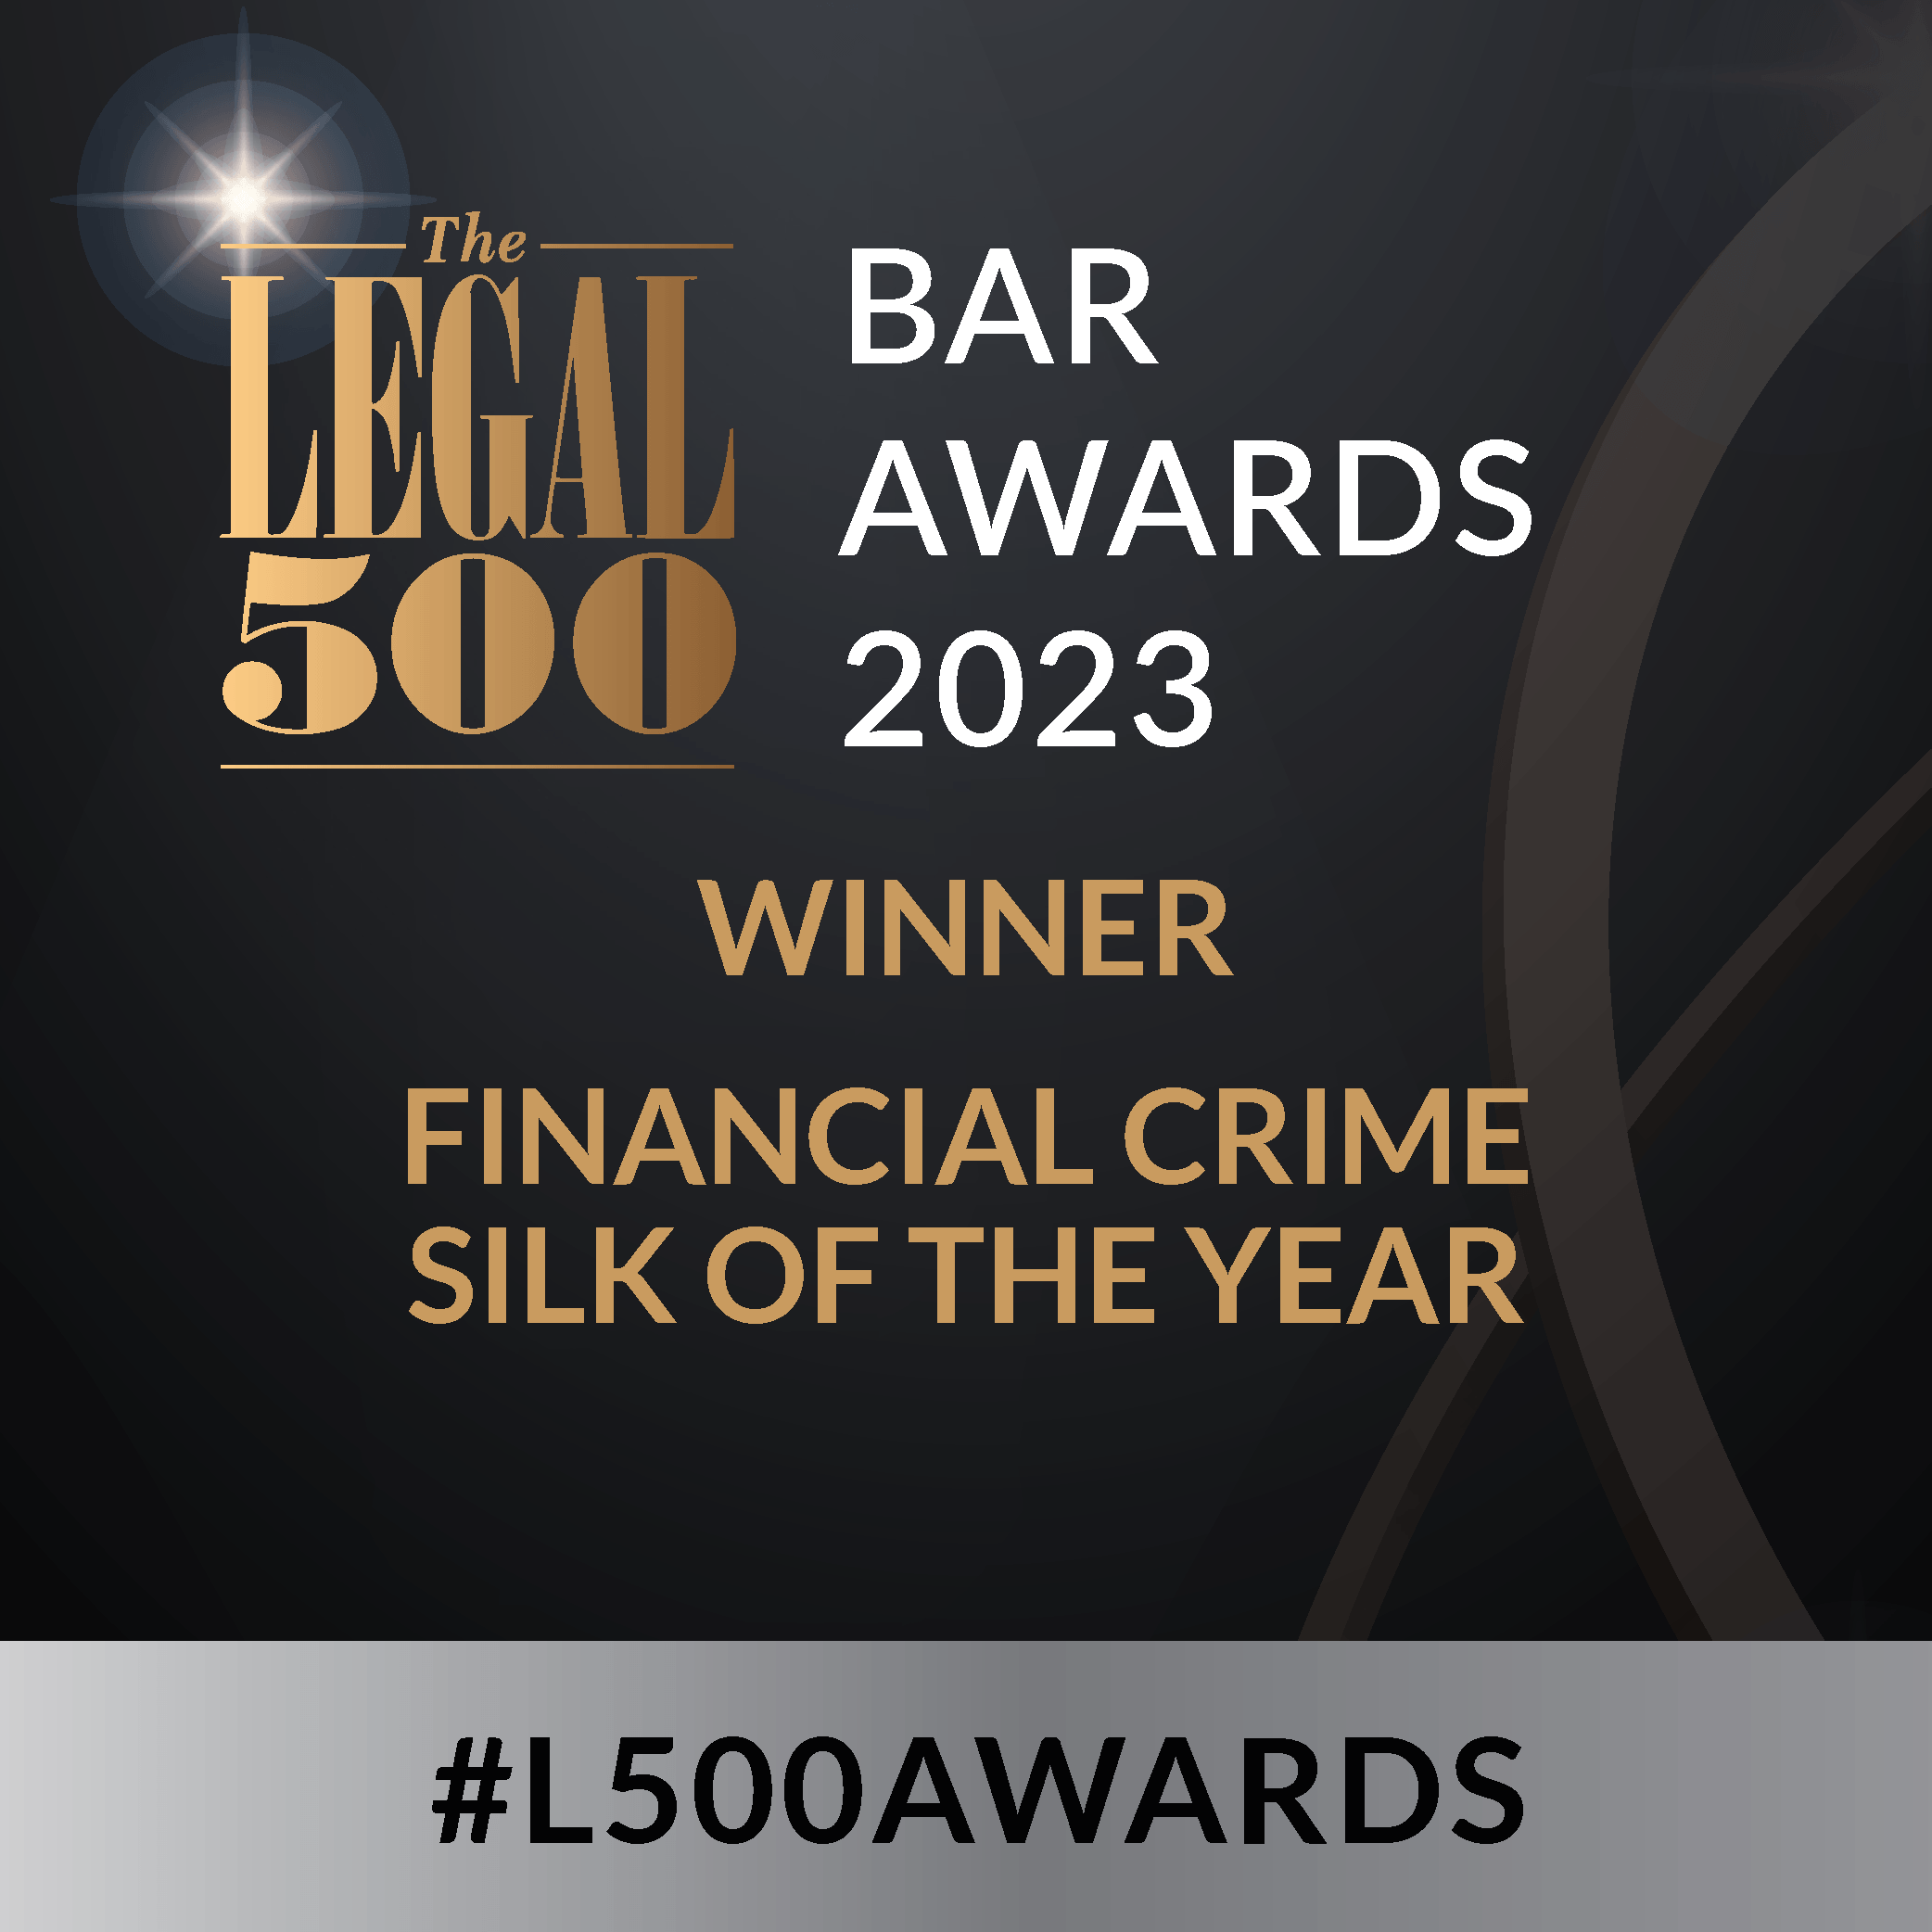 The Legal 500 – Financial crime silk of the year